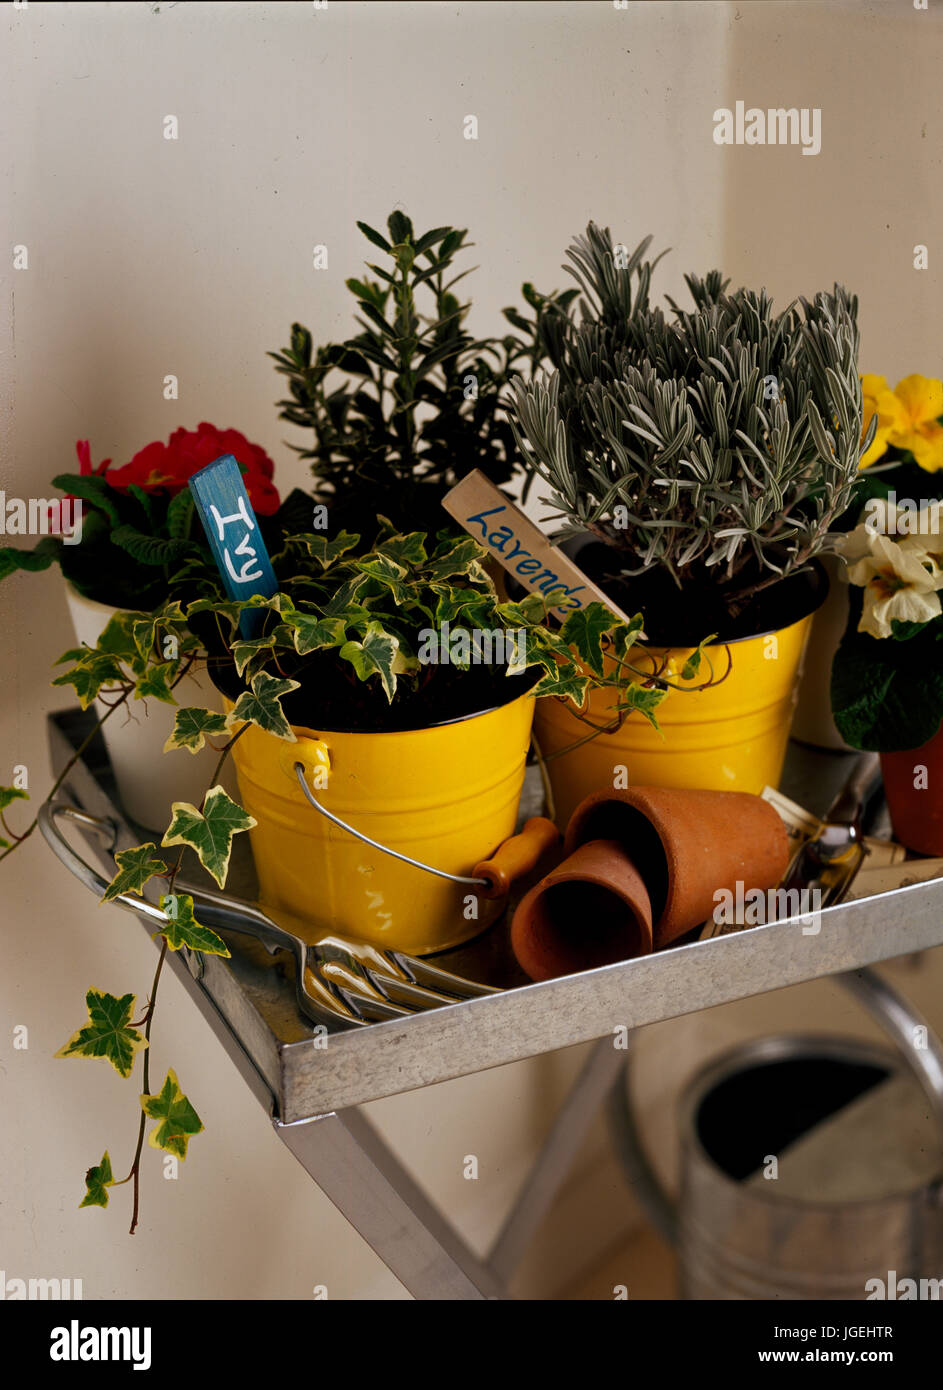 Tray of garden pots and plants Stock Photo